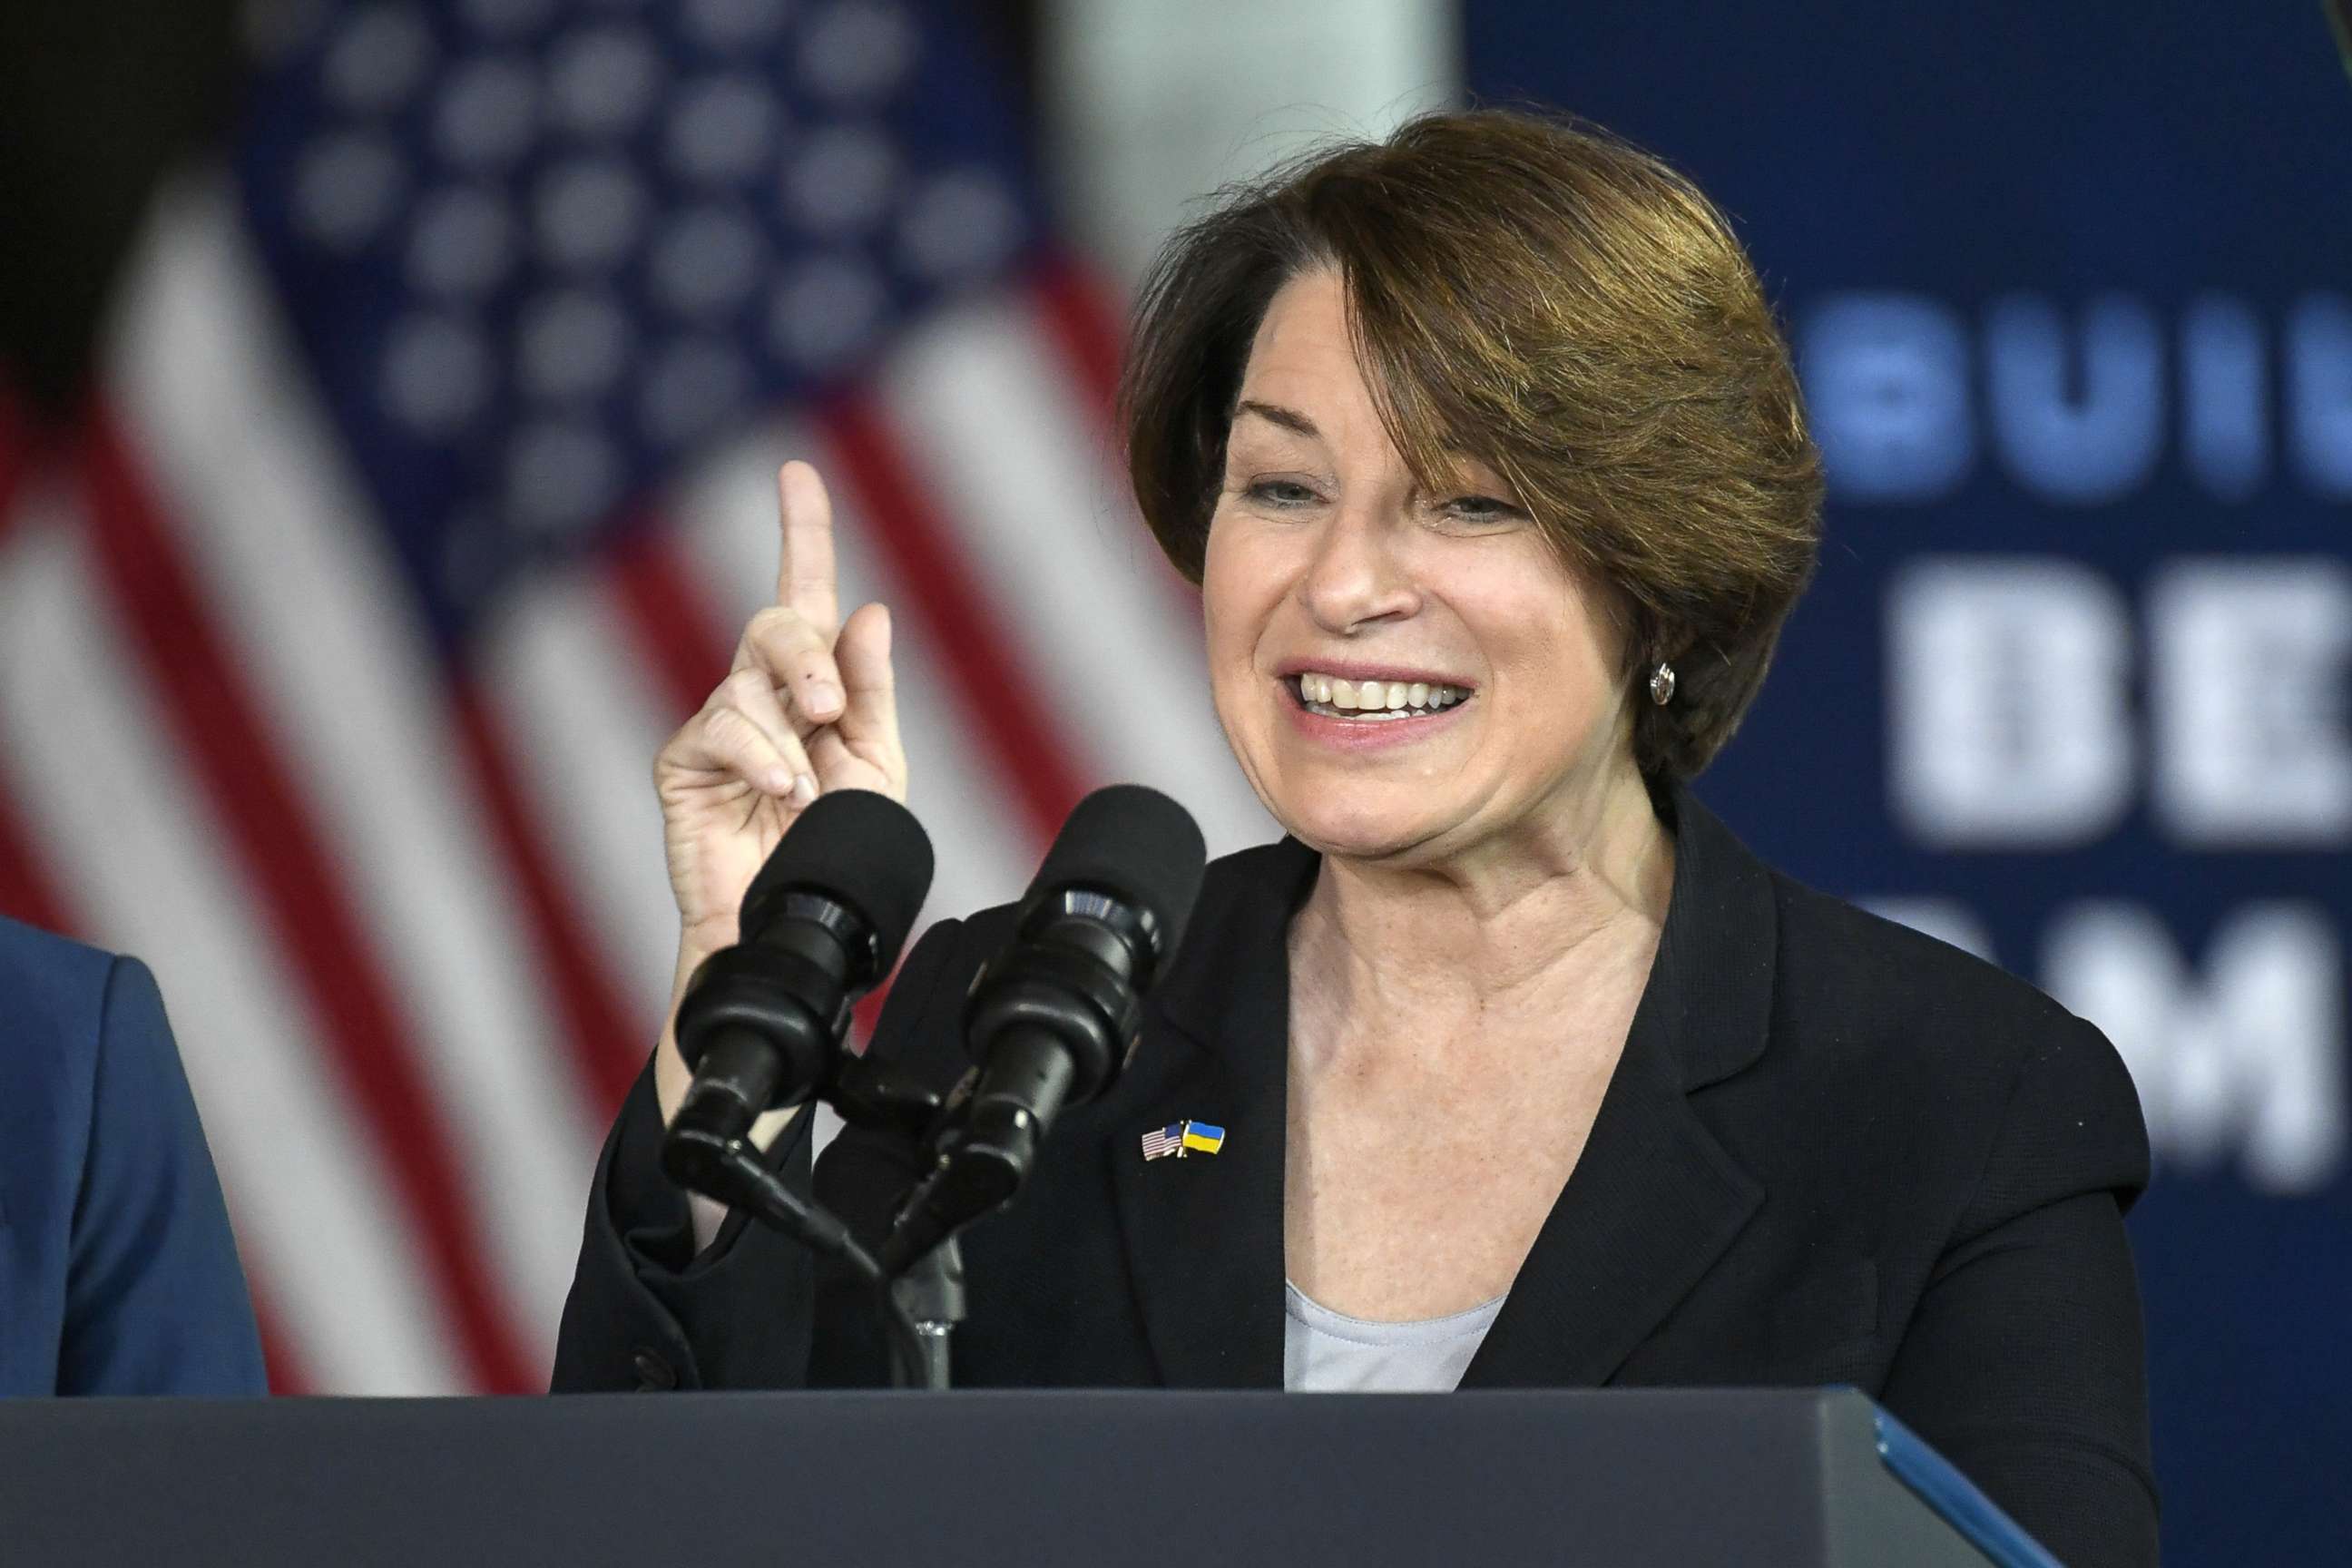 PHOTO: In this March 2, 2022, file photo, Sen. Amy Klobuchar speaks at an event where President Joe Biden appeared to talk about the $1 trillion infrastructure law, at the University of Wisconsin-Superior, in Superior, Wis.